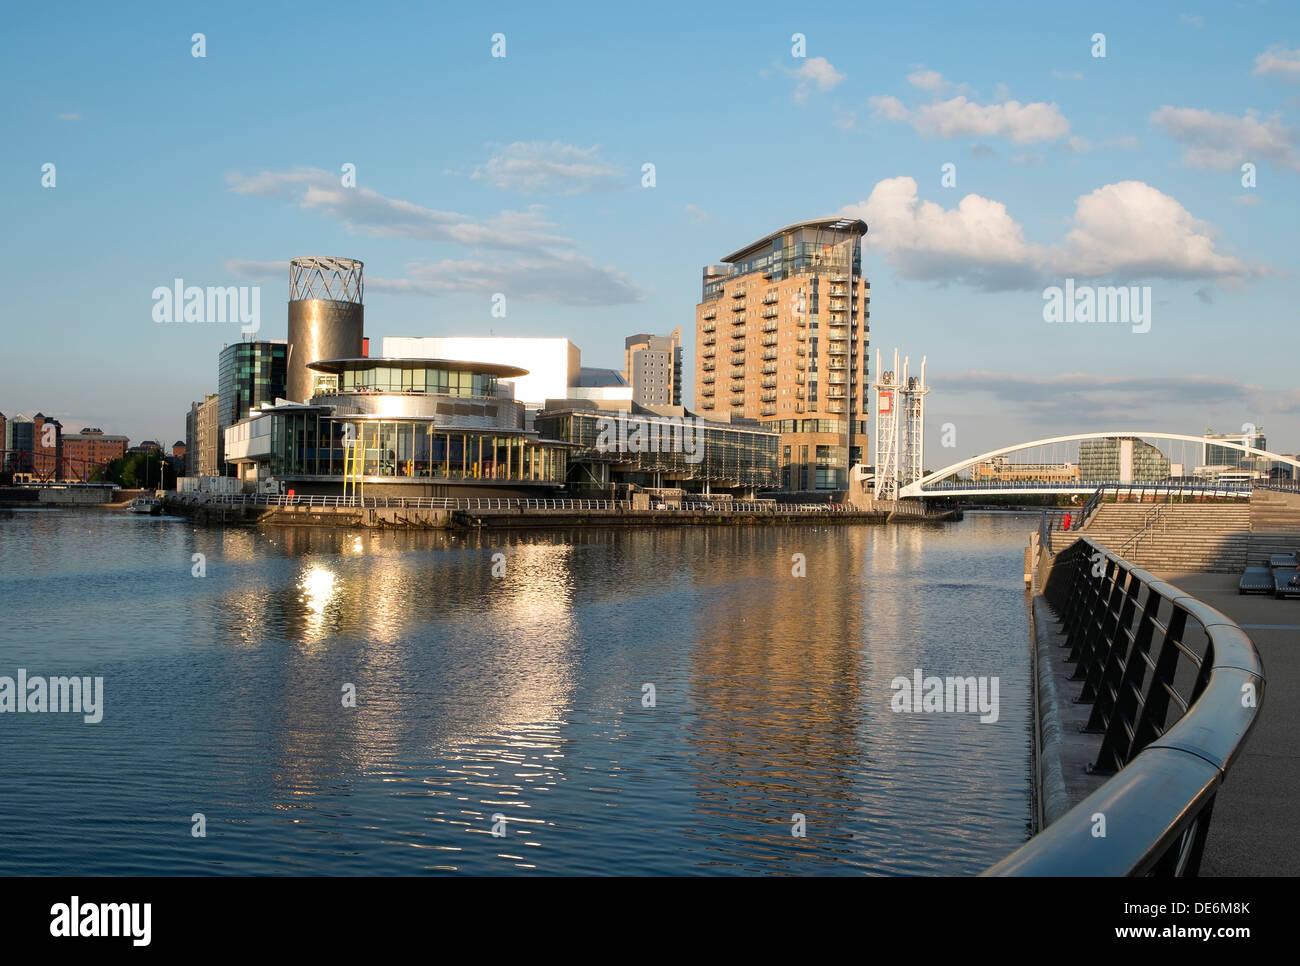 Inghilterra, Greater Manchester, Salford Quays, Lowry Theatre e Ponte di Lowry Foto Stock